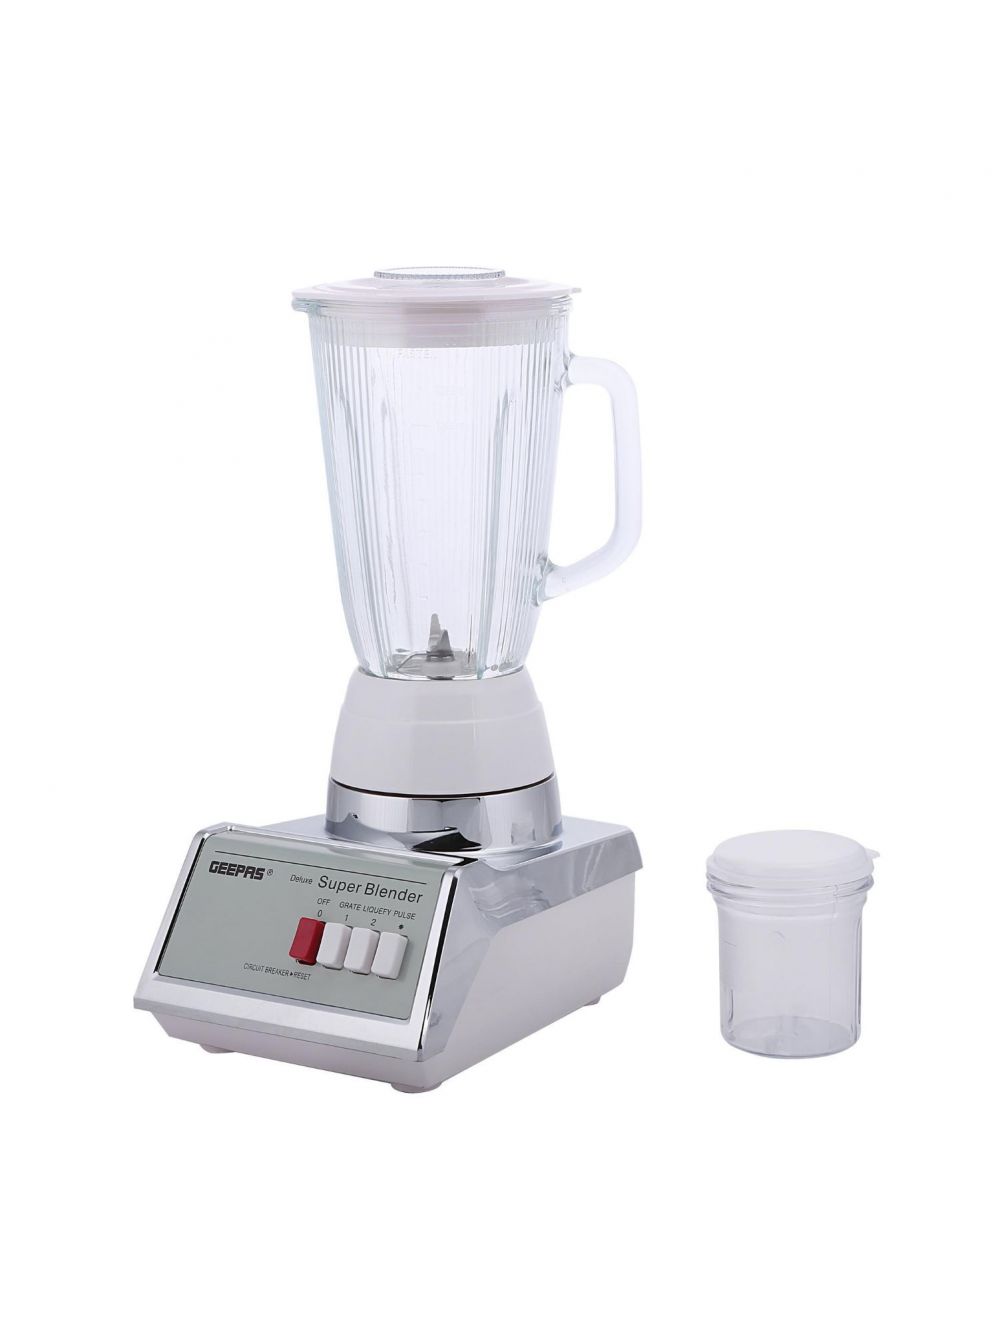 Geepas Electric Mixer 450 Watts, White [gsb1603]